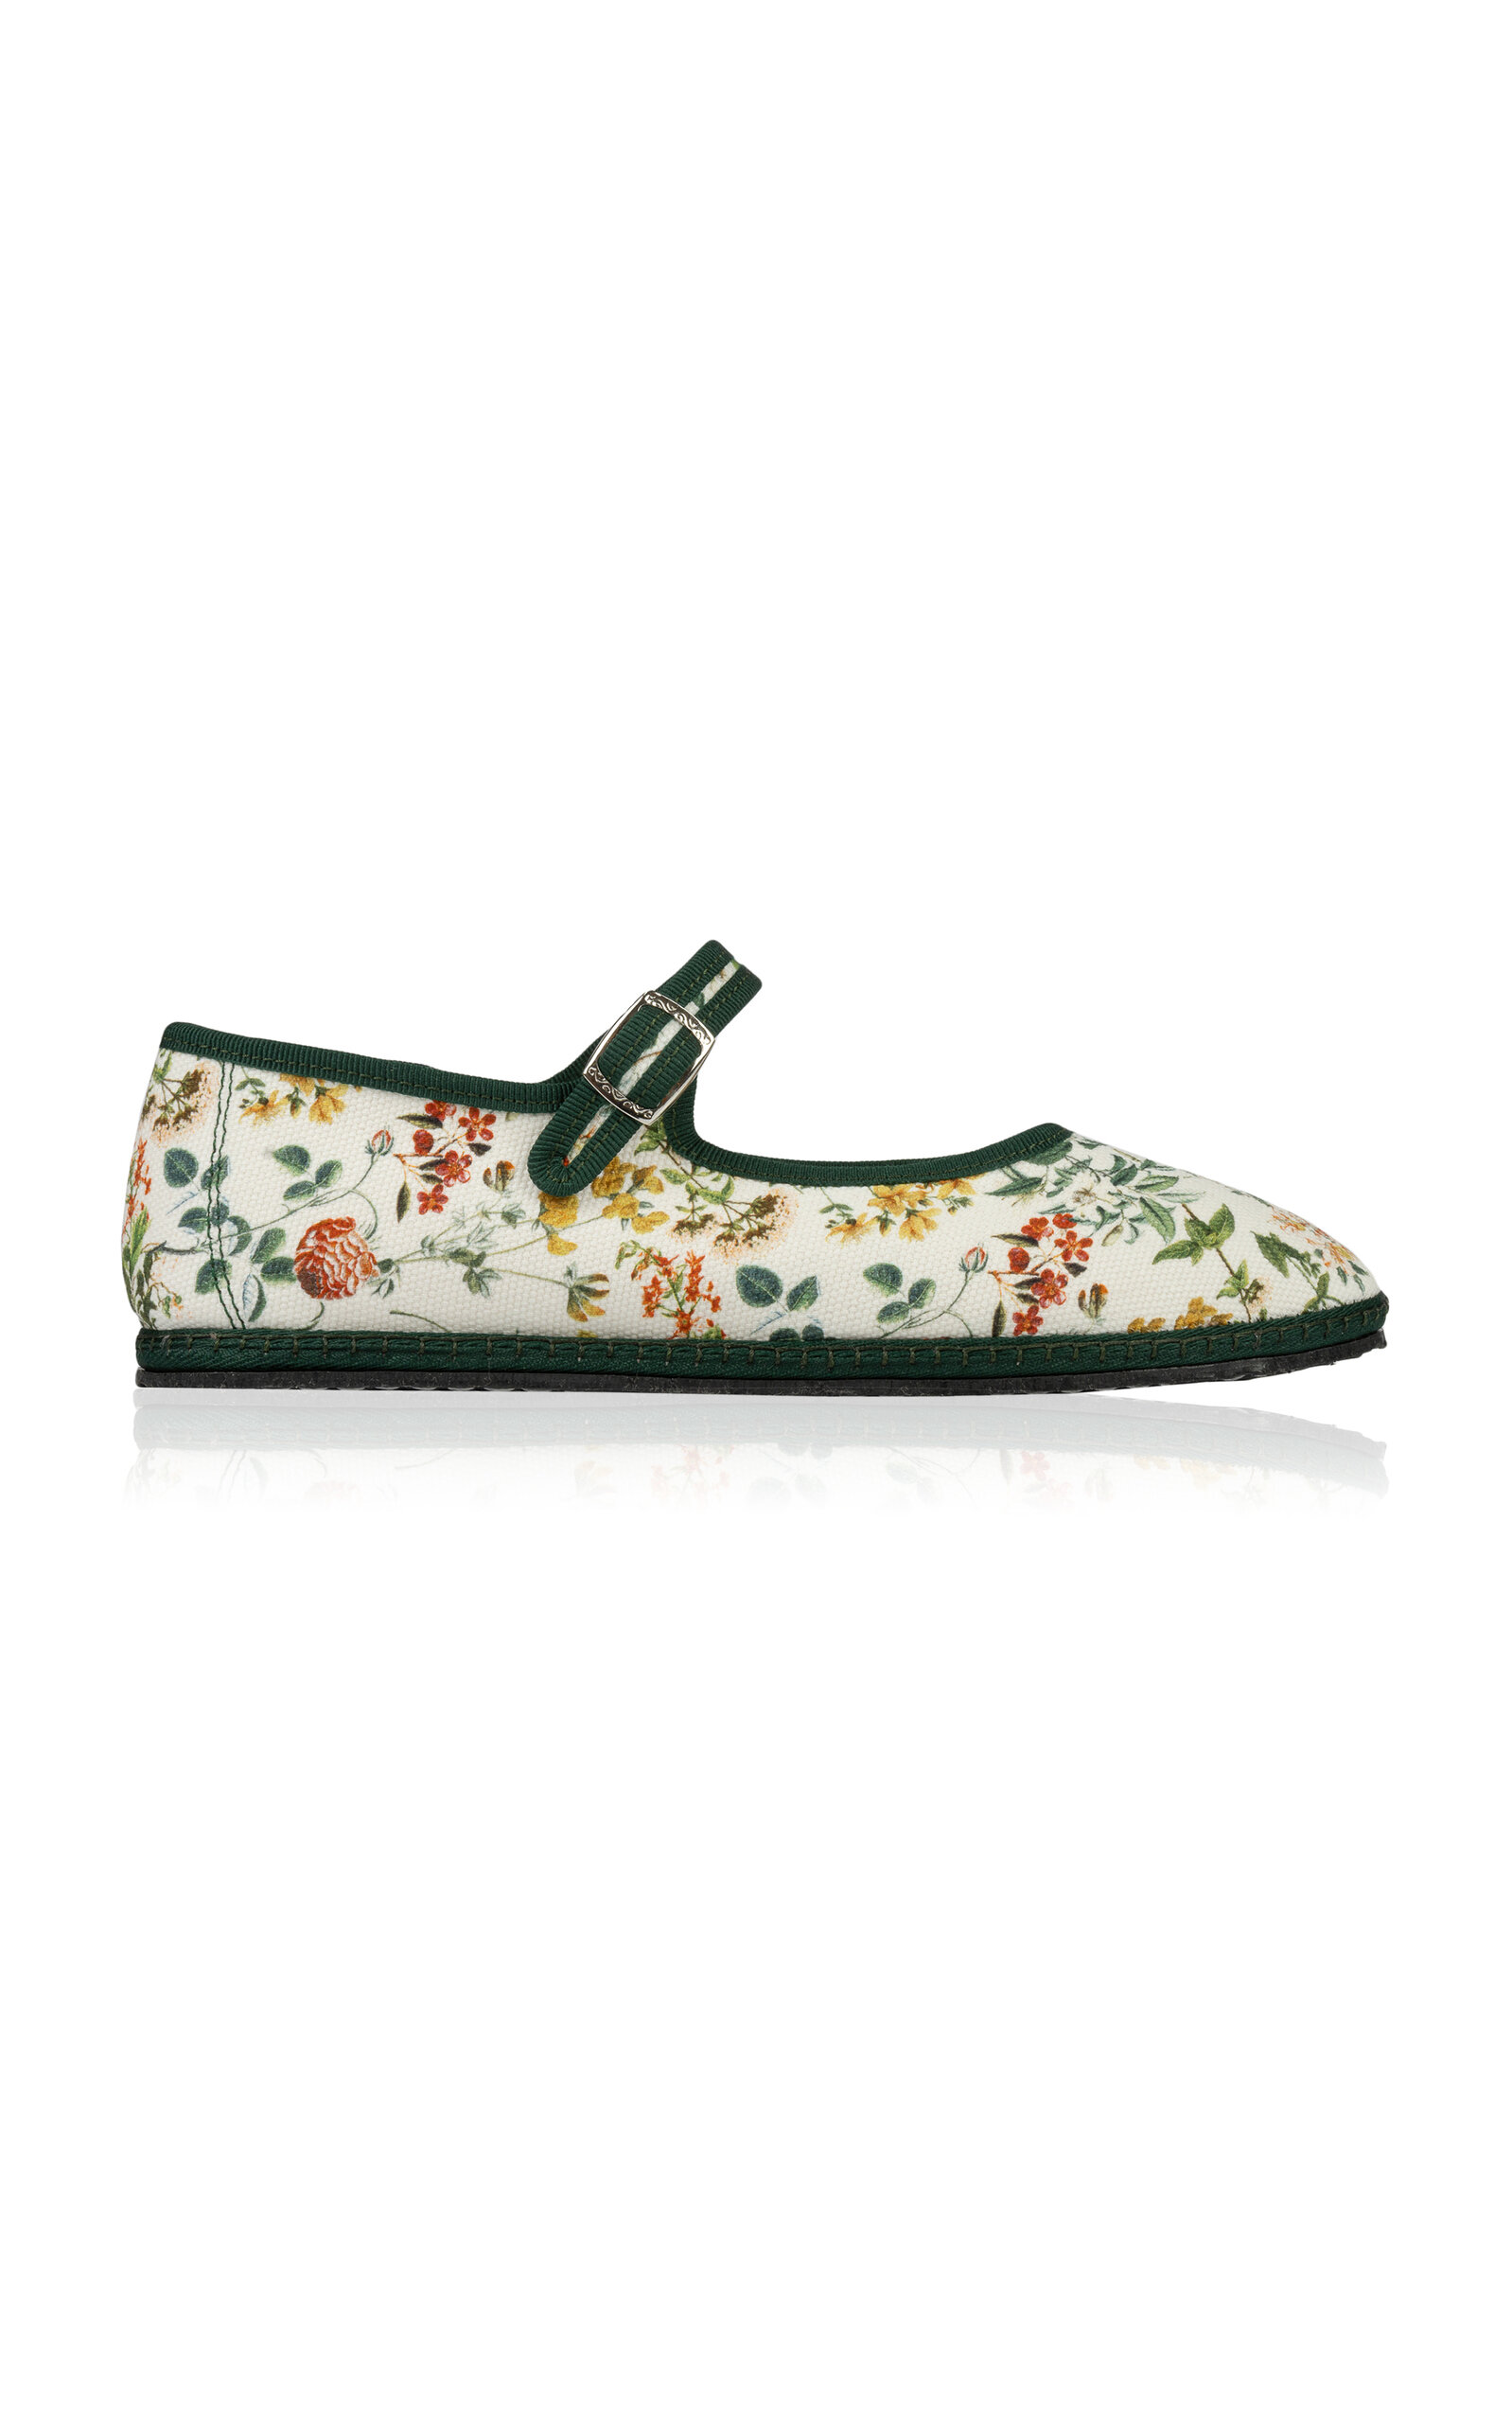 Floral Cotton Canvas Mary Jane Flats